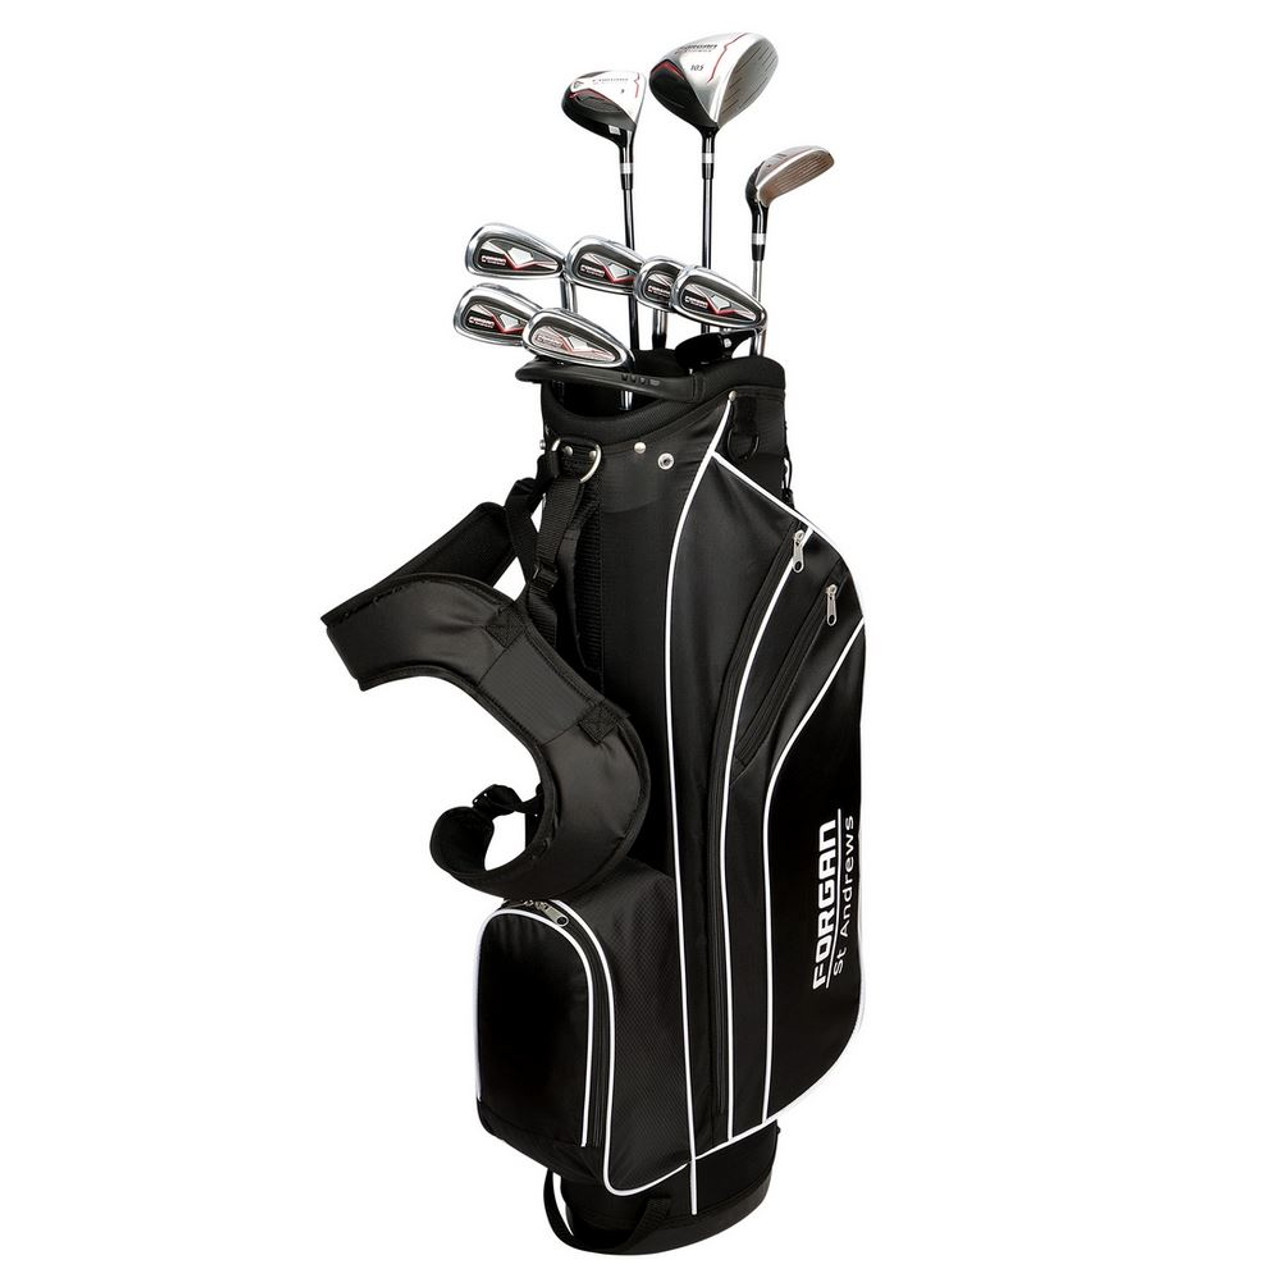 Forgan of St Andrews F100 +1 Inch Golf Clubs Set with Bag